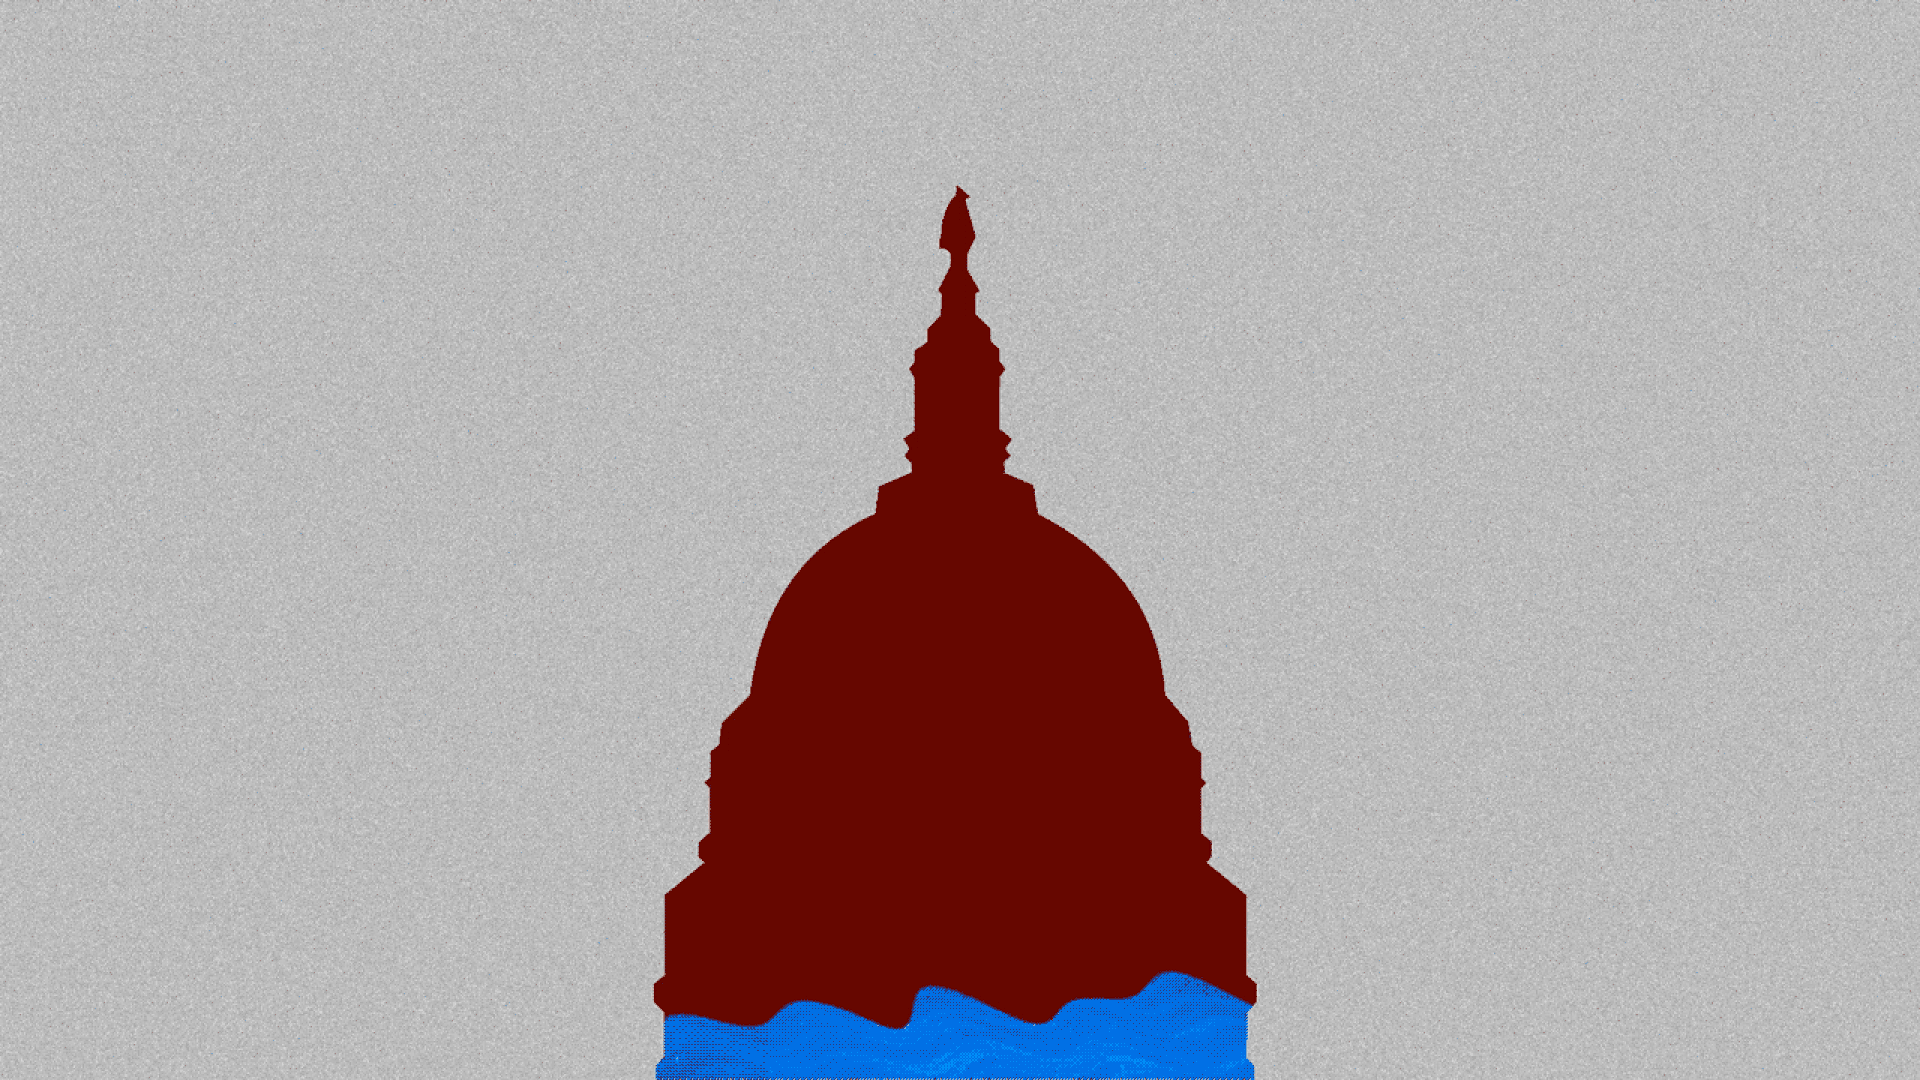 A silhouette of the Capitol dome with a blue wave inside it